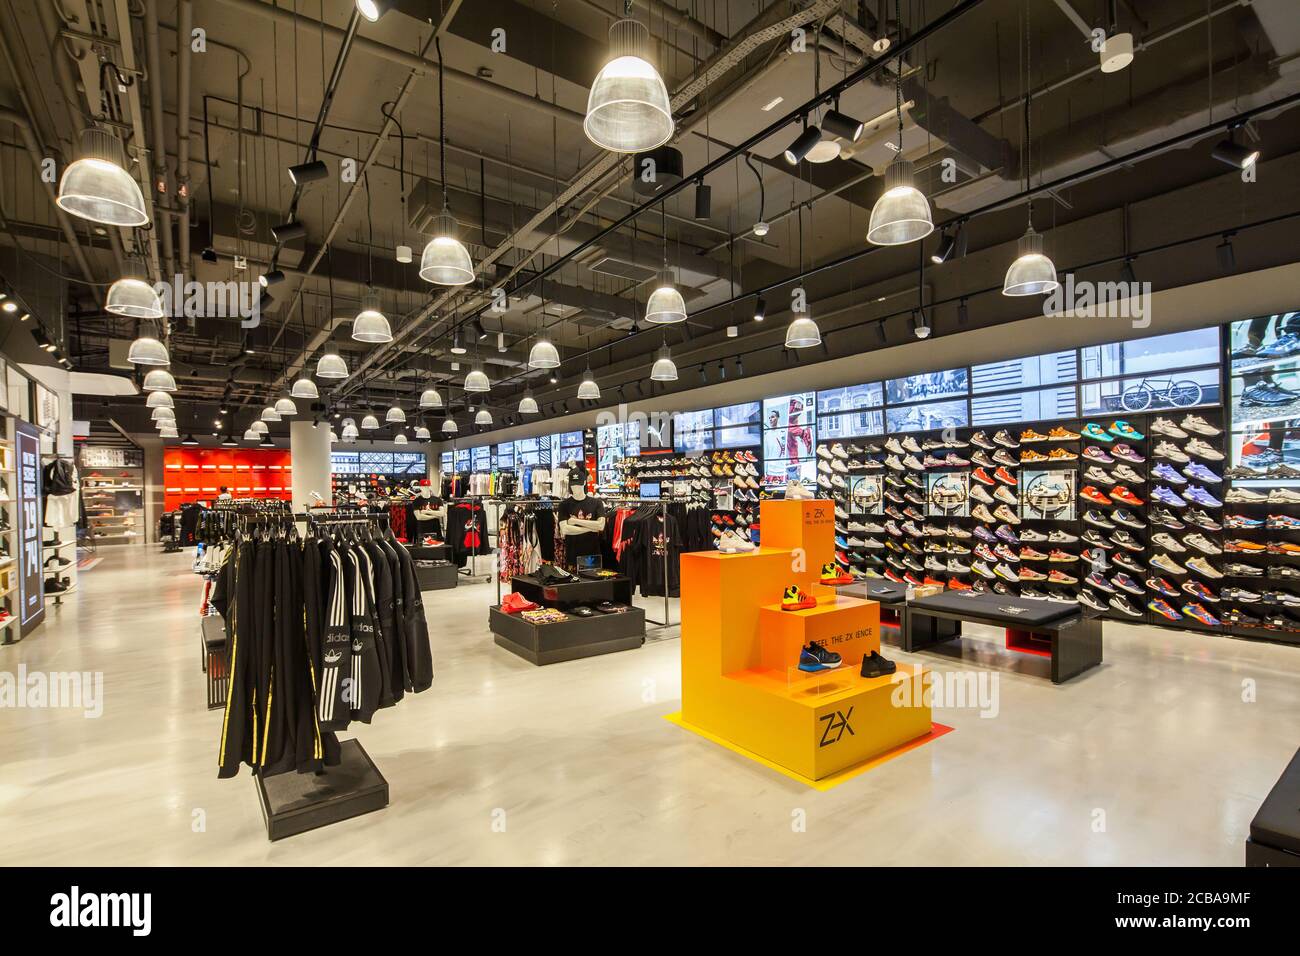 A huge interior space that displays hundreds of shoes brands and ...